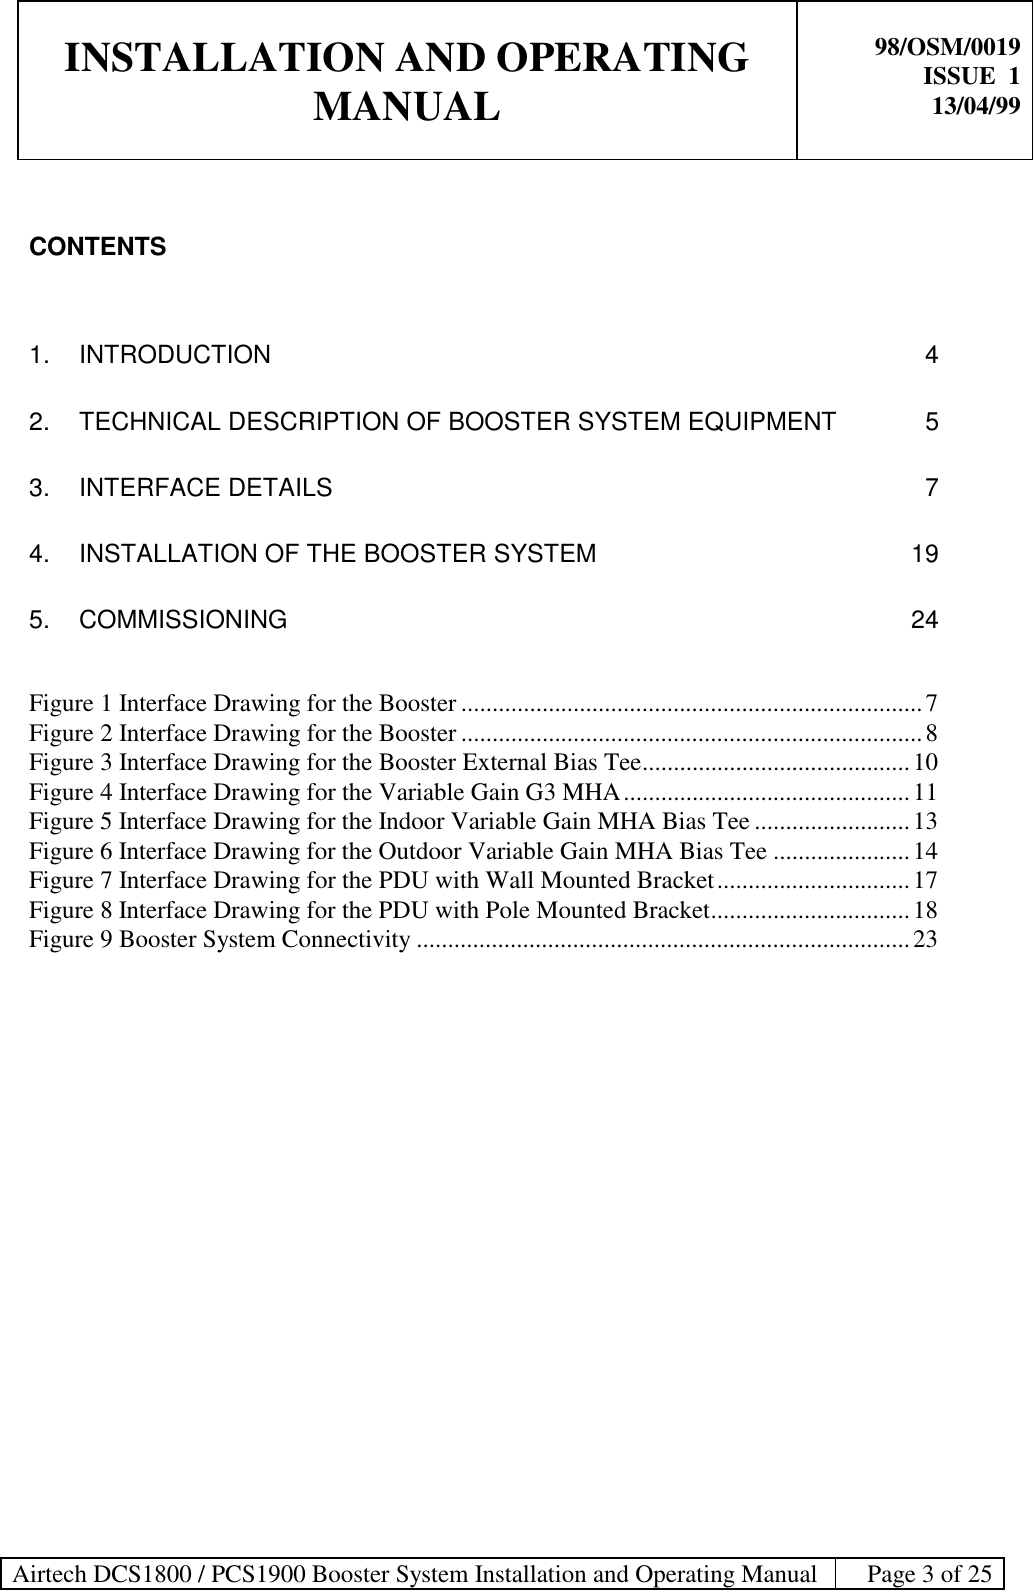 INSTALLATION AND OPERATINGMANUAL98/OSM/0019ISSUE  113/04/99Airtech DCS1800 / PCS1900 Booster System Installation and Operating Manual Page 3 of 25CONTENTS1. INTRODUCTION 42. TECHNICAL DESCRIPTION OF BOOSTER SYSTEM EQUIPMENT 53. INTERFACE DETAILS 74. INSTALLATION OF THE BOOSTER SYSTEM 195. COMMISSIONING 24Figure 1 Interface Drawing for the Booster ..........................................................................7Figure 2 Interface Drawing for the Booster ..........................................................................8Figure 3 Interface Drawing for the Booster External Bias Tee...........................................10Figure 4 Interface Drawing for the Variable Gain G3 MHA..............................................11Figure 5 Interface Drawing for the Indoor Variable Gain MHA Bias Tee .........................13Figure 6 Interface Drawing for the Outdoor Variable Gain MHA Bias Tee ......................14Figure 7 Interface Drawing for the PDU with Wall Mounted Bracket...............................17Figure 8 Interface Drawing for the PDU with Pole Mounted Bracket................................18Figure 9 Booster System Connectivity ...............................................................................23